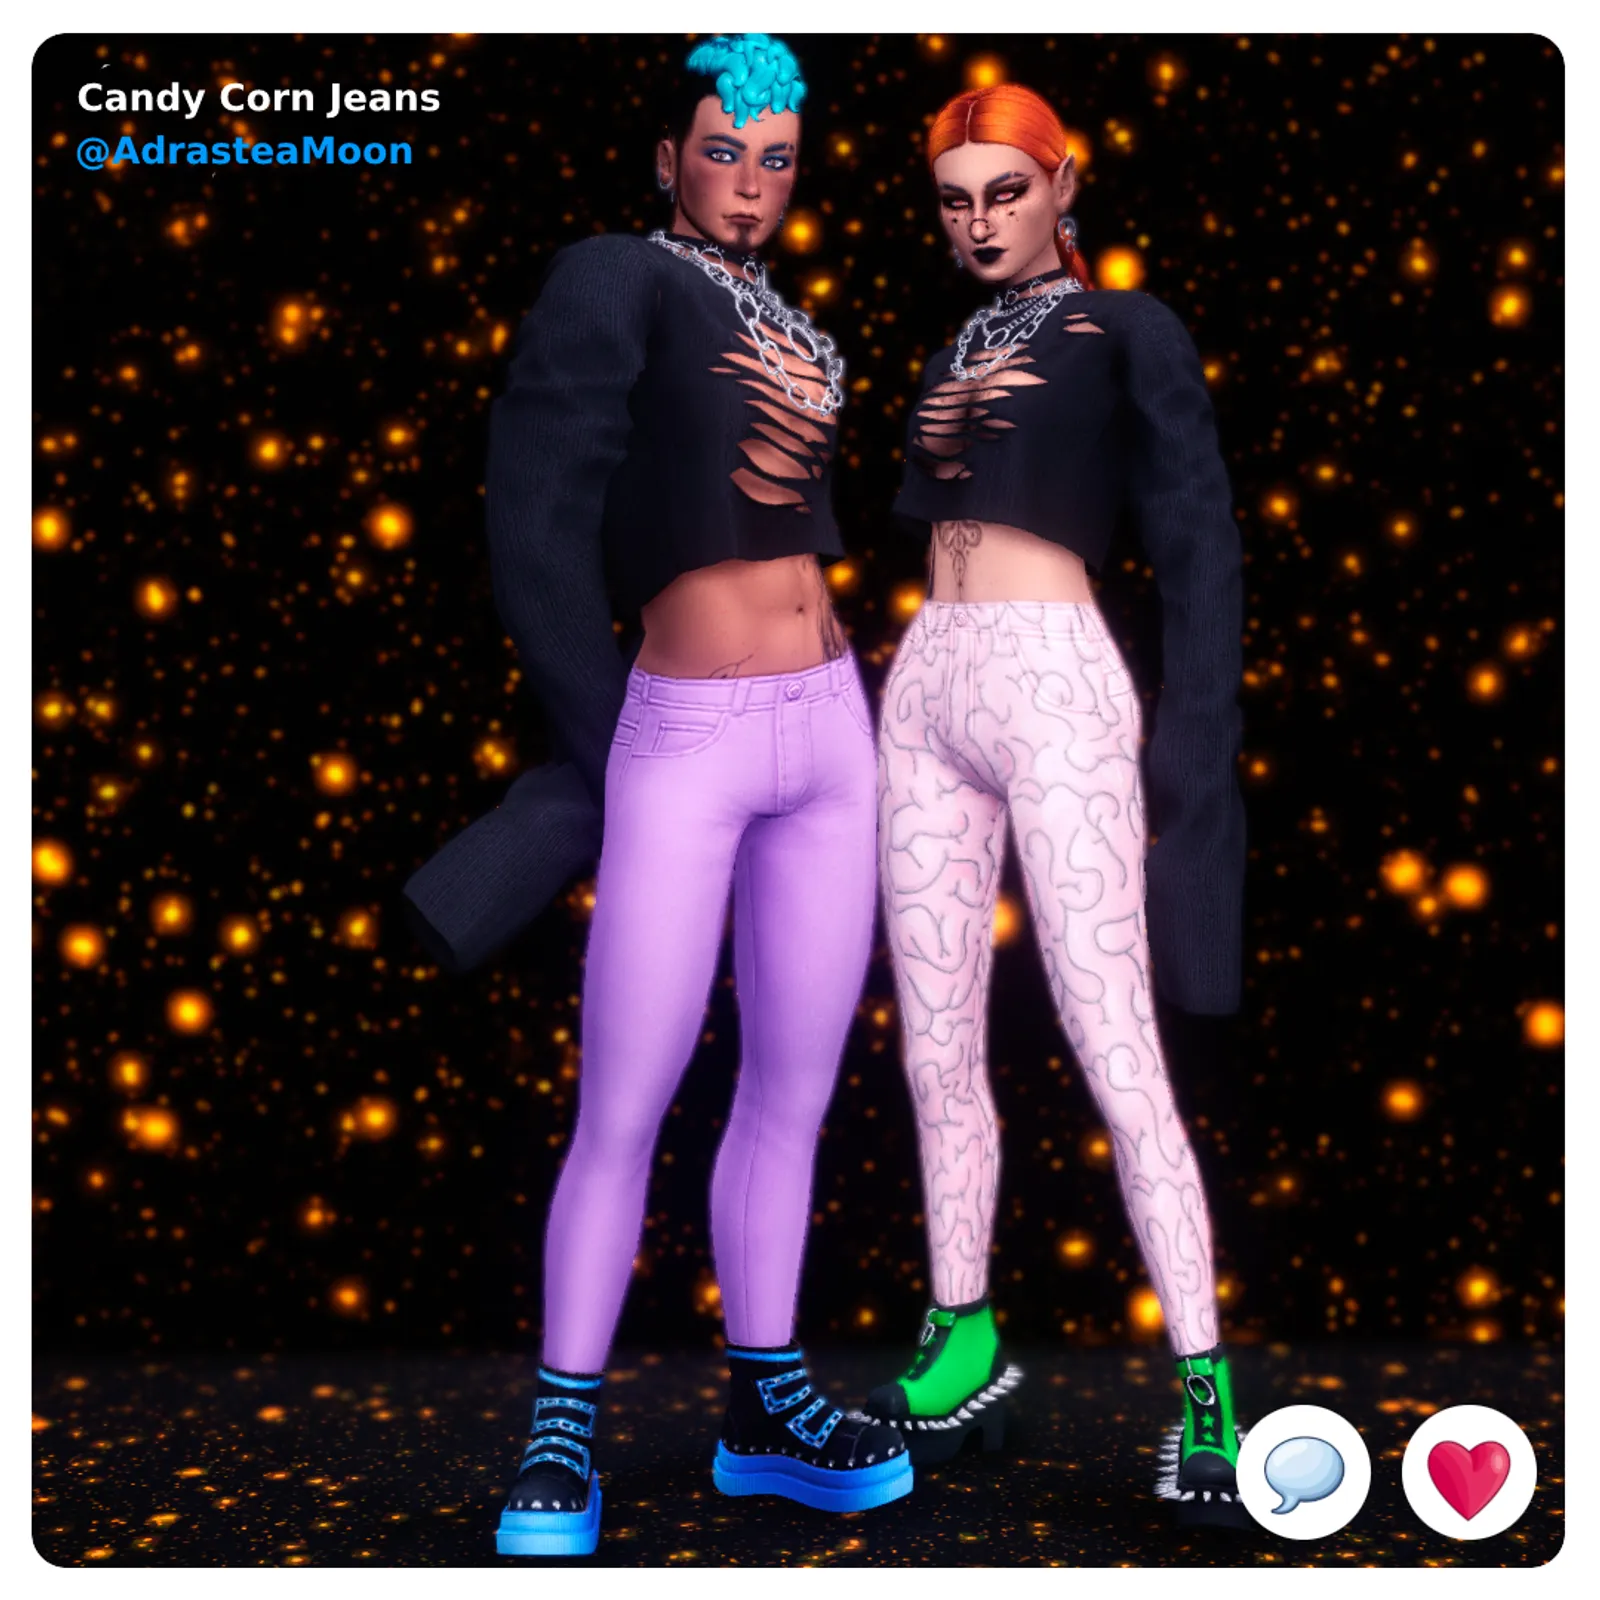 Candy Corn Jeans